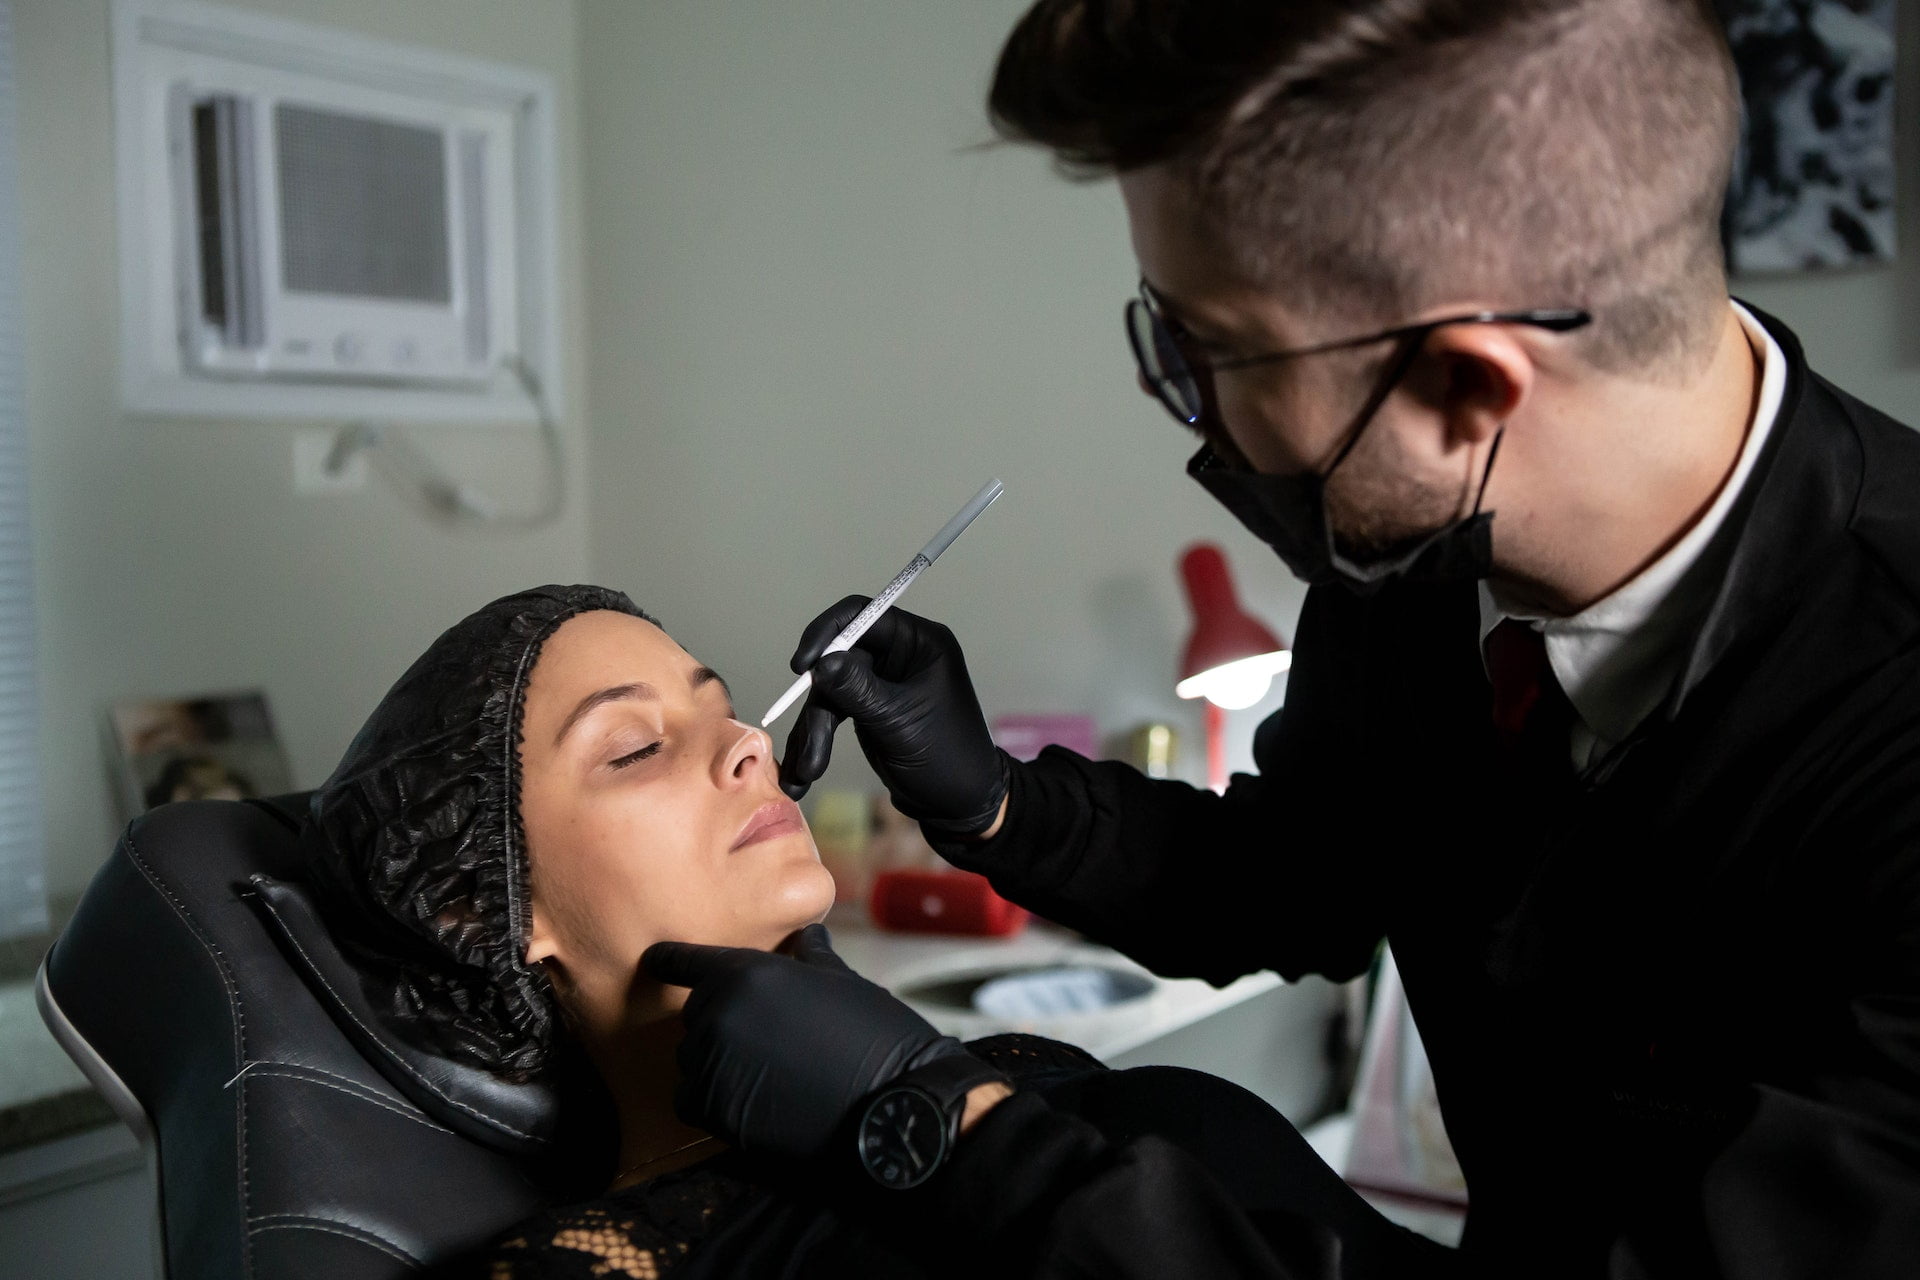 Is Permanent Makeup Worth It?